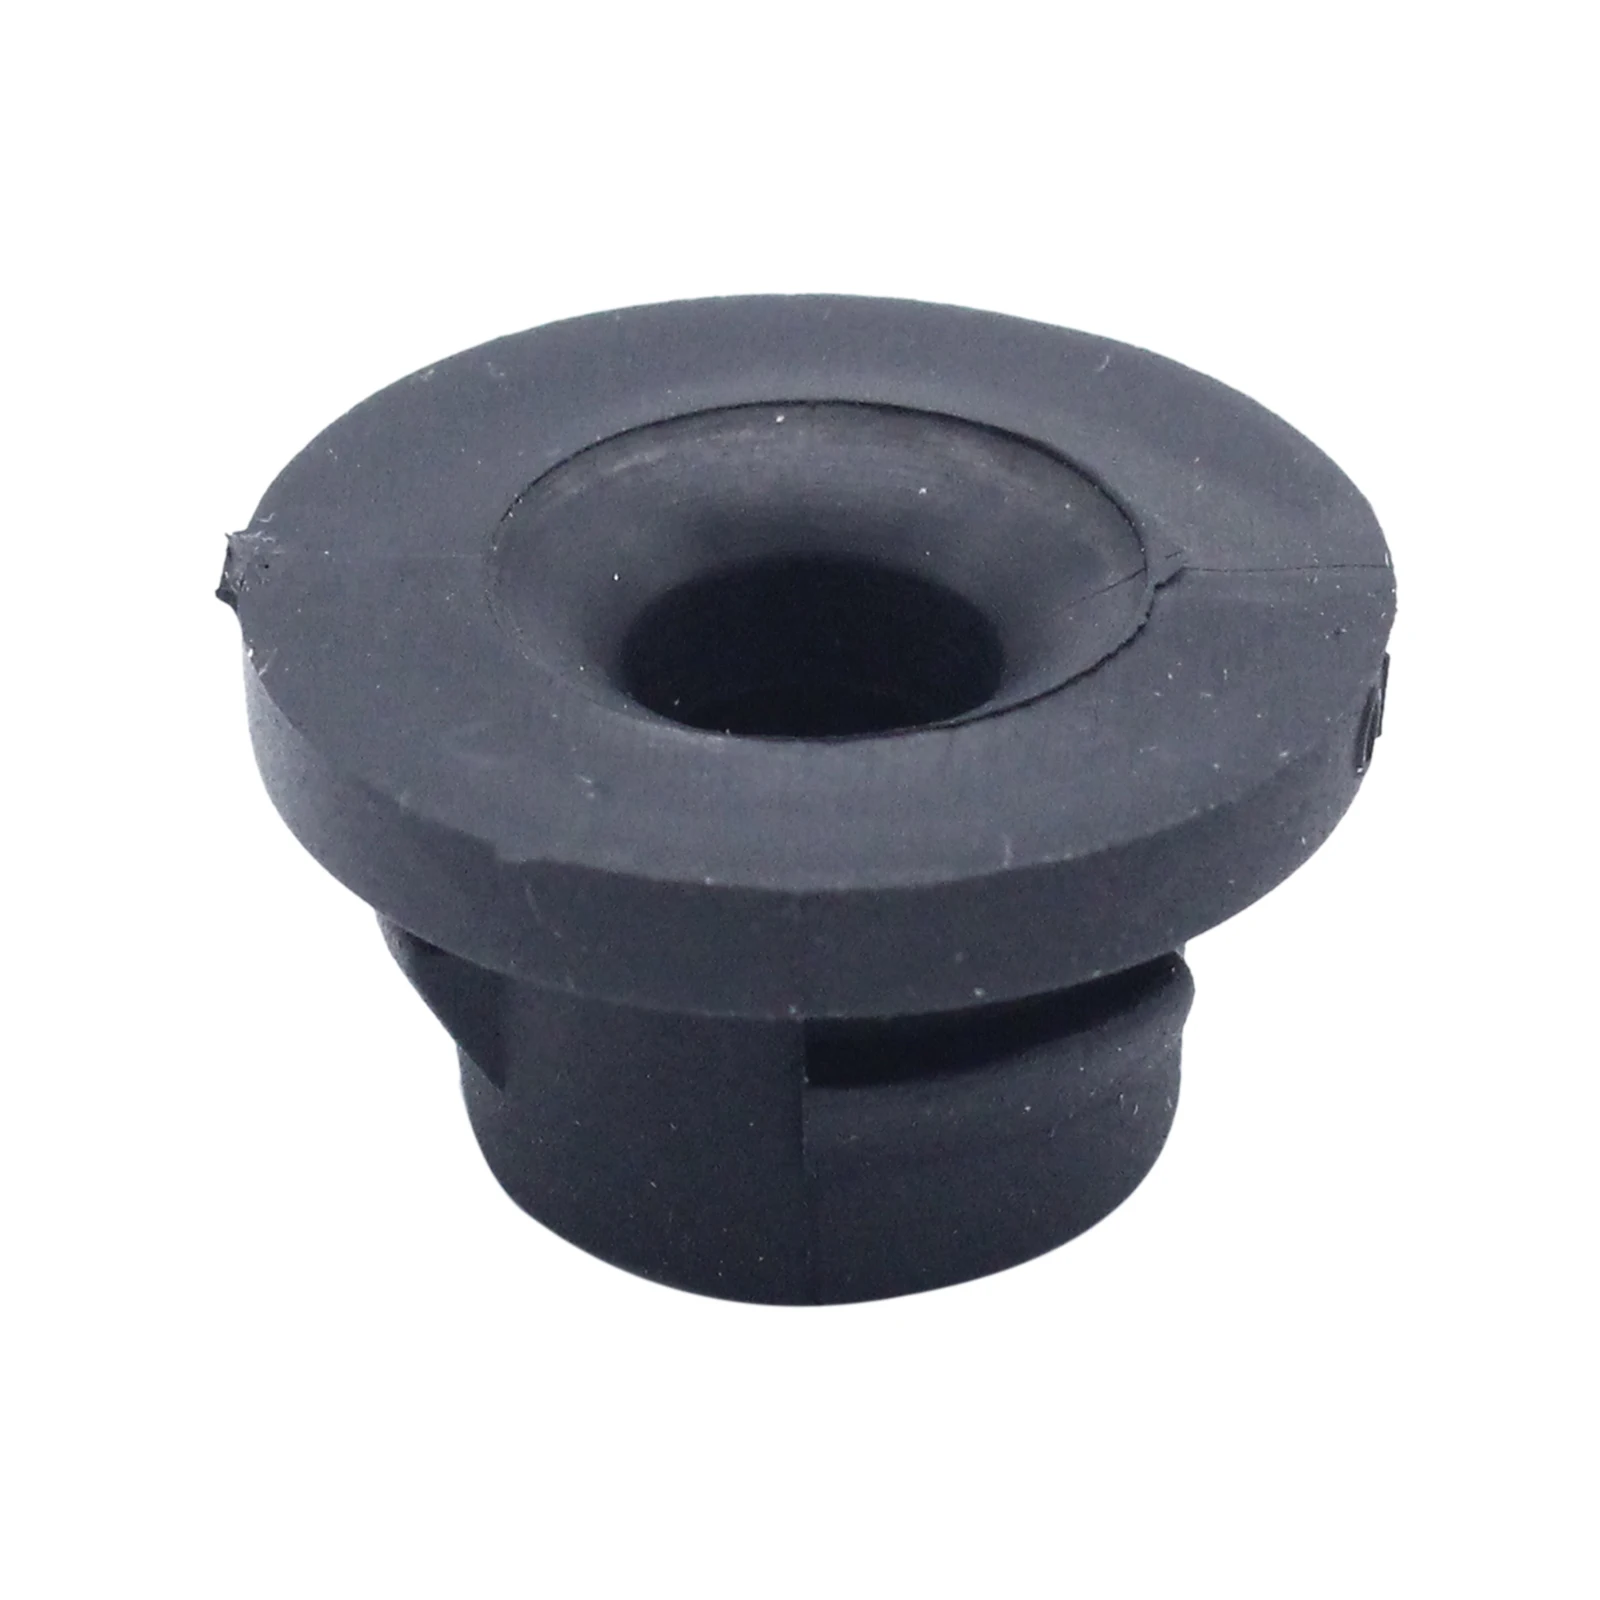 Car Air Filter Plugs Rubber Insert Grommet for Citroen Peugeot 1.6 Plug Dust Filter Rubber Air Filter Ring Plug